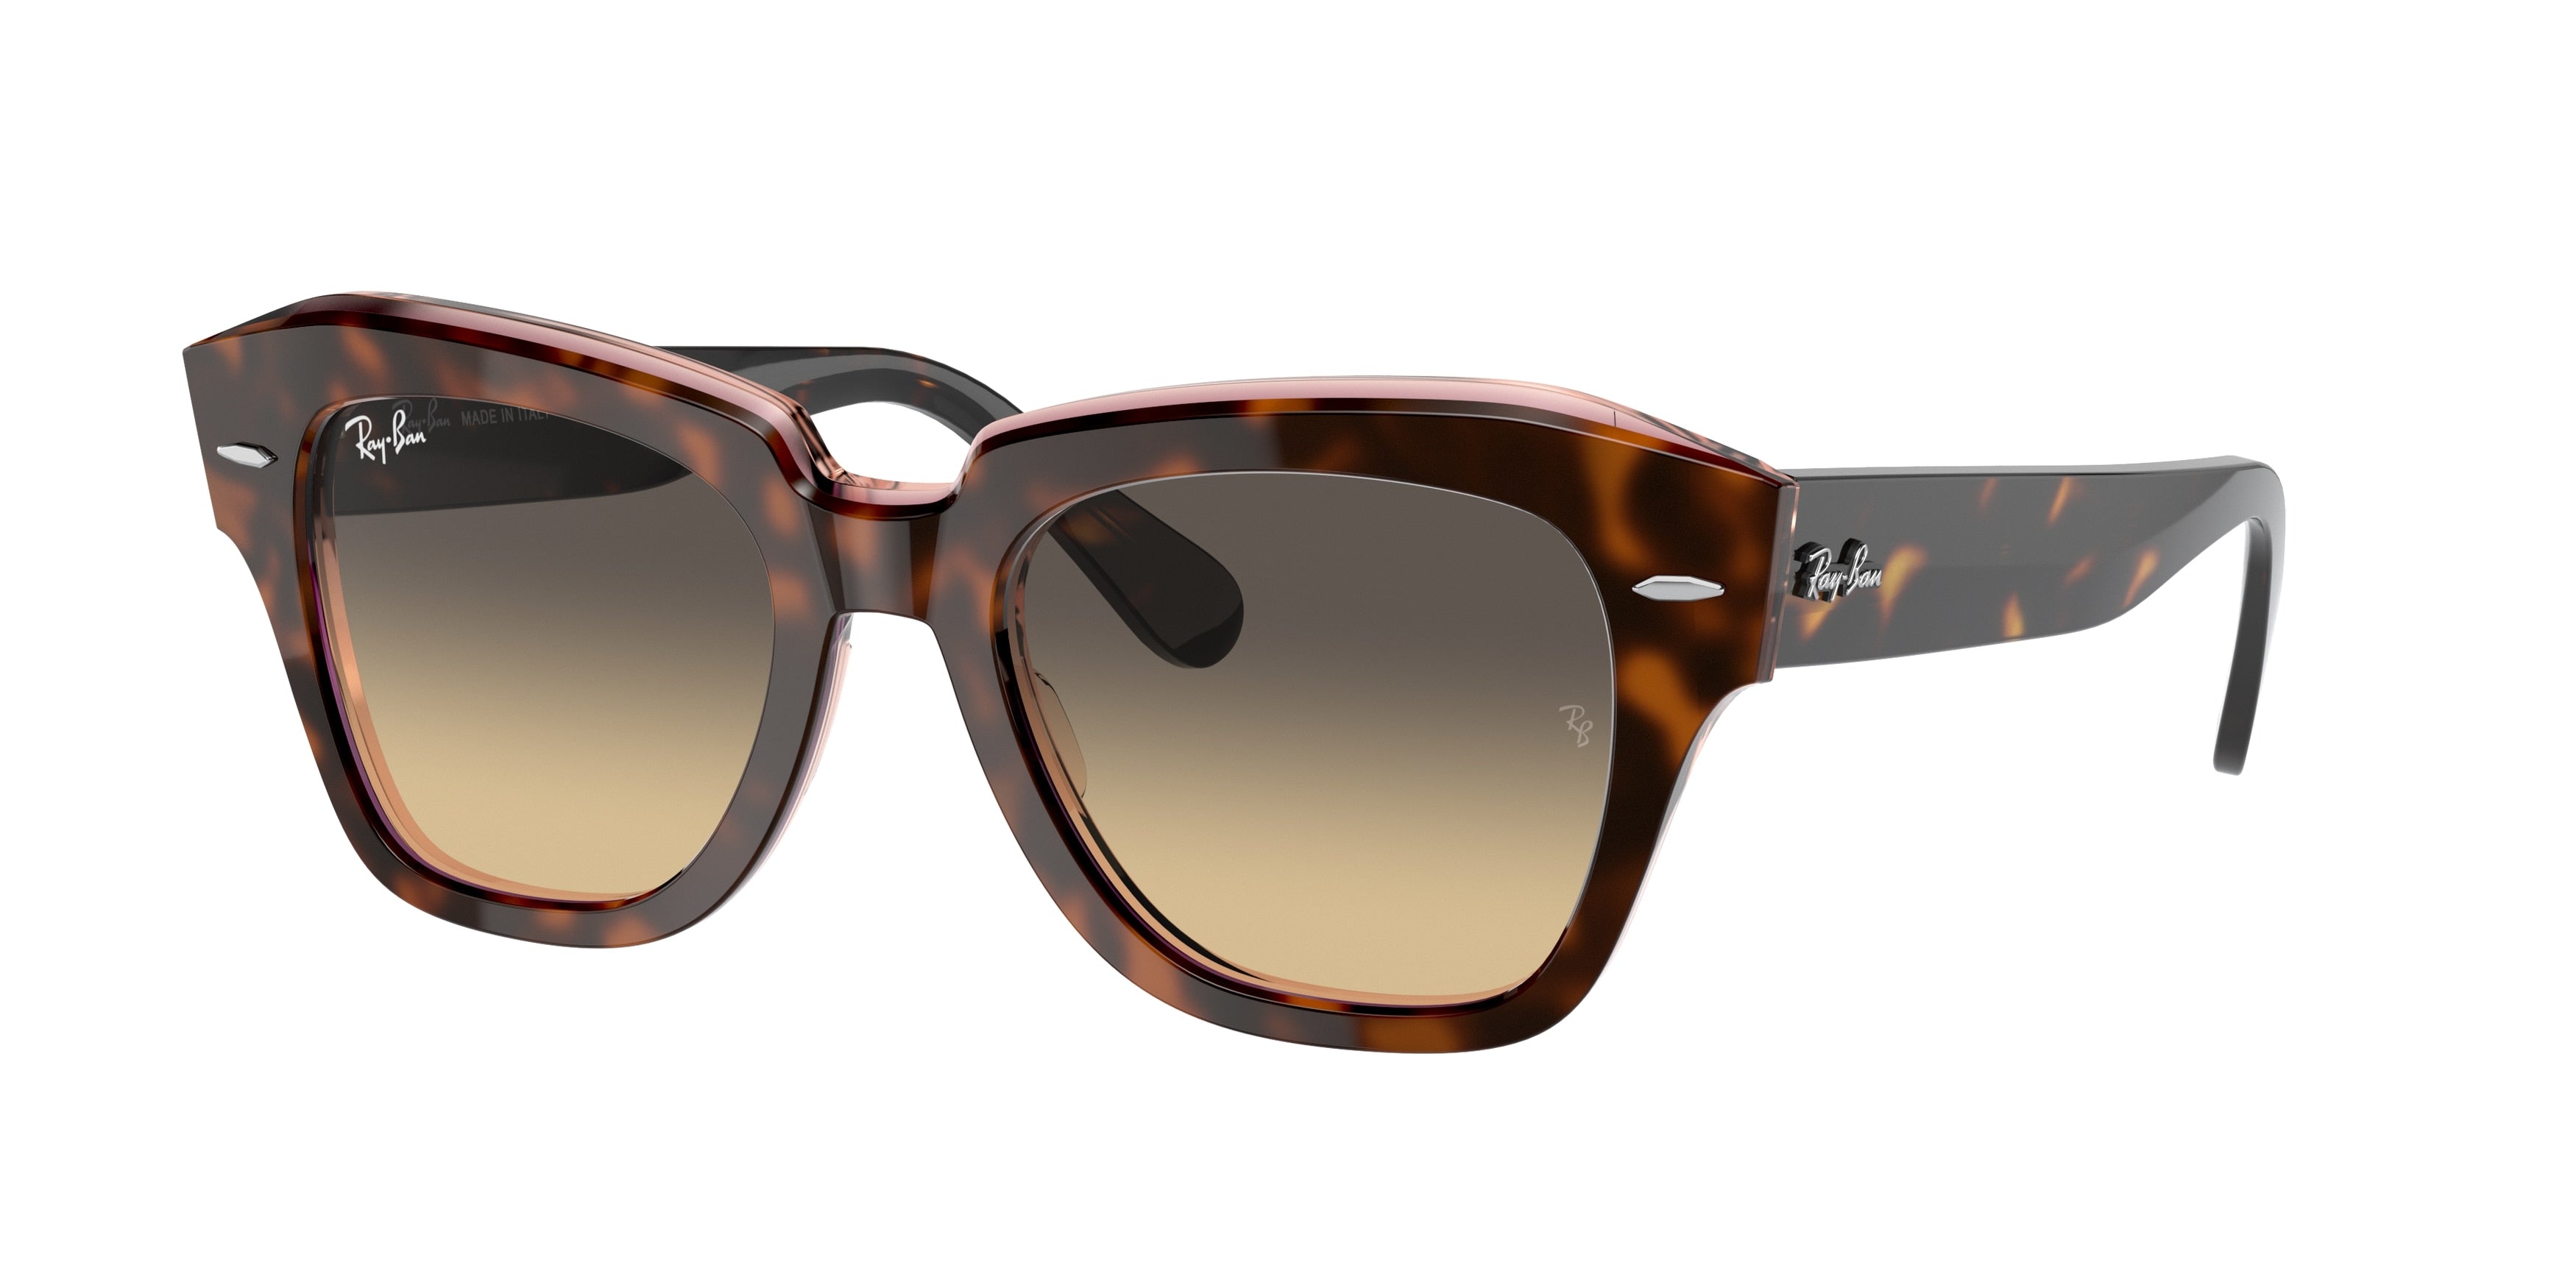 Ray-Ban STATE STREET RB2186 Square Sunglasses  1324BG-Havana On Transparent Pink 52-145-20 - Color Map Brown